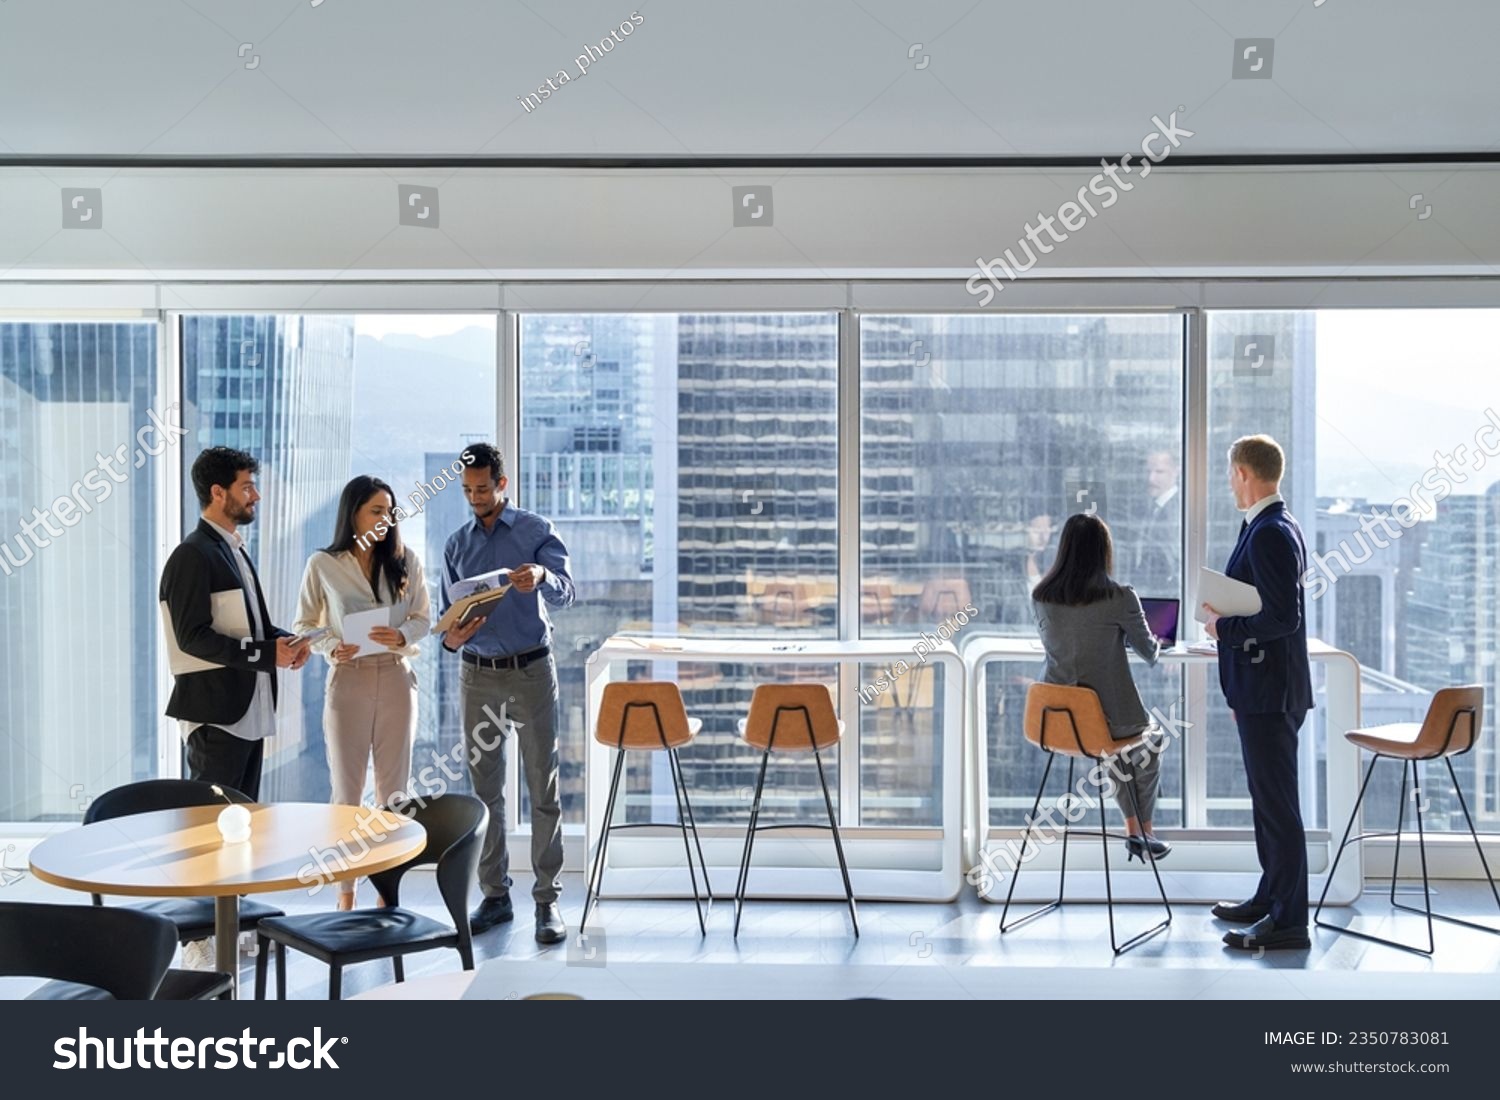 Diverse professional international team business people workers group working in corporate office space, diverse colleagues discussing work having teamwork conversations together at meeting. #2350783081